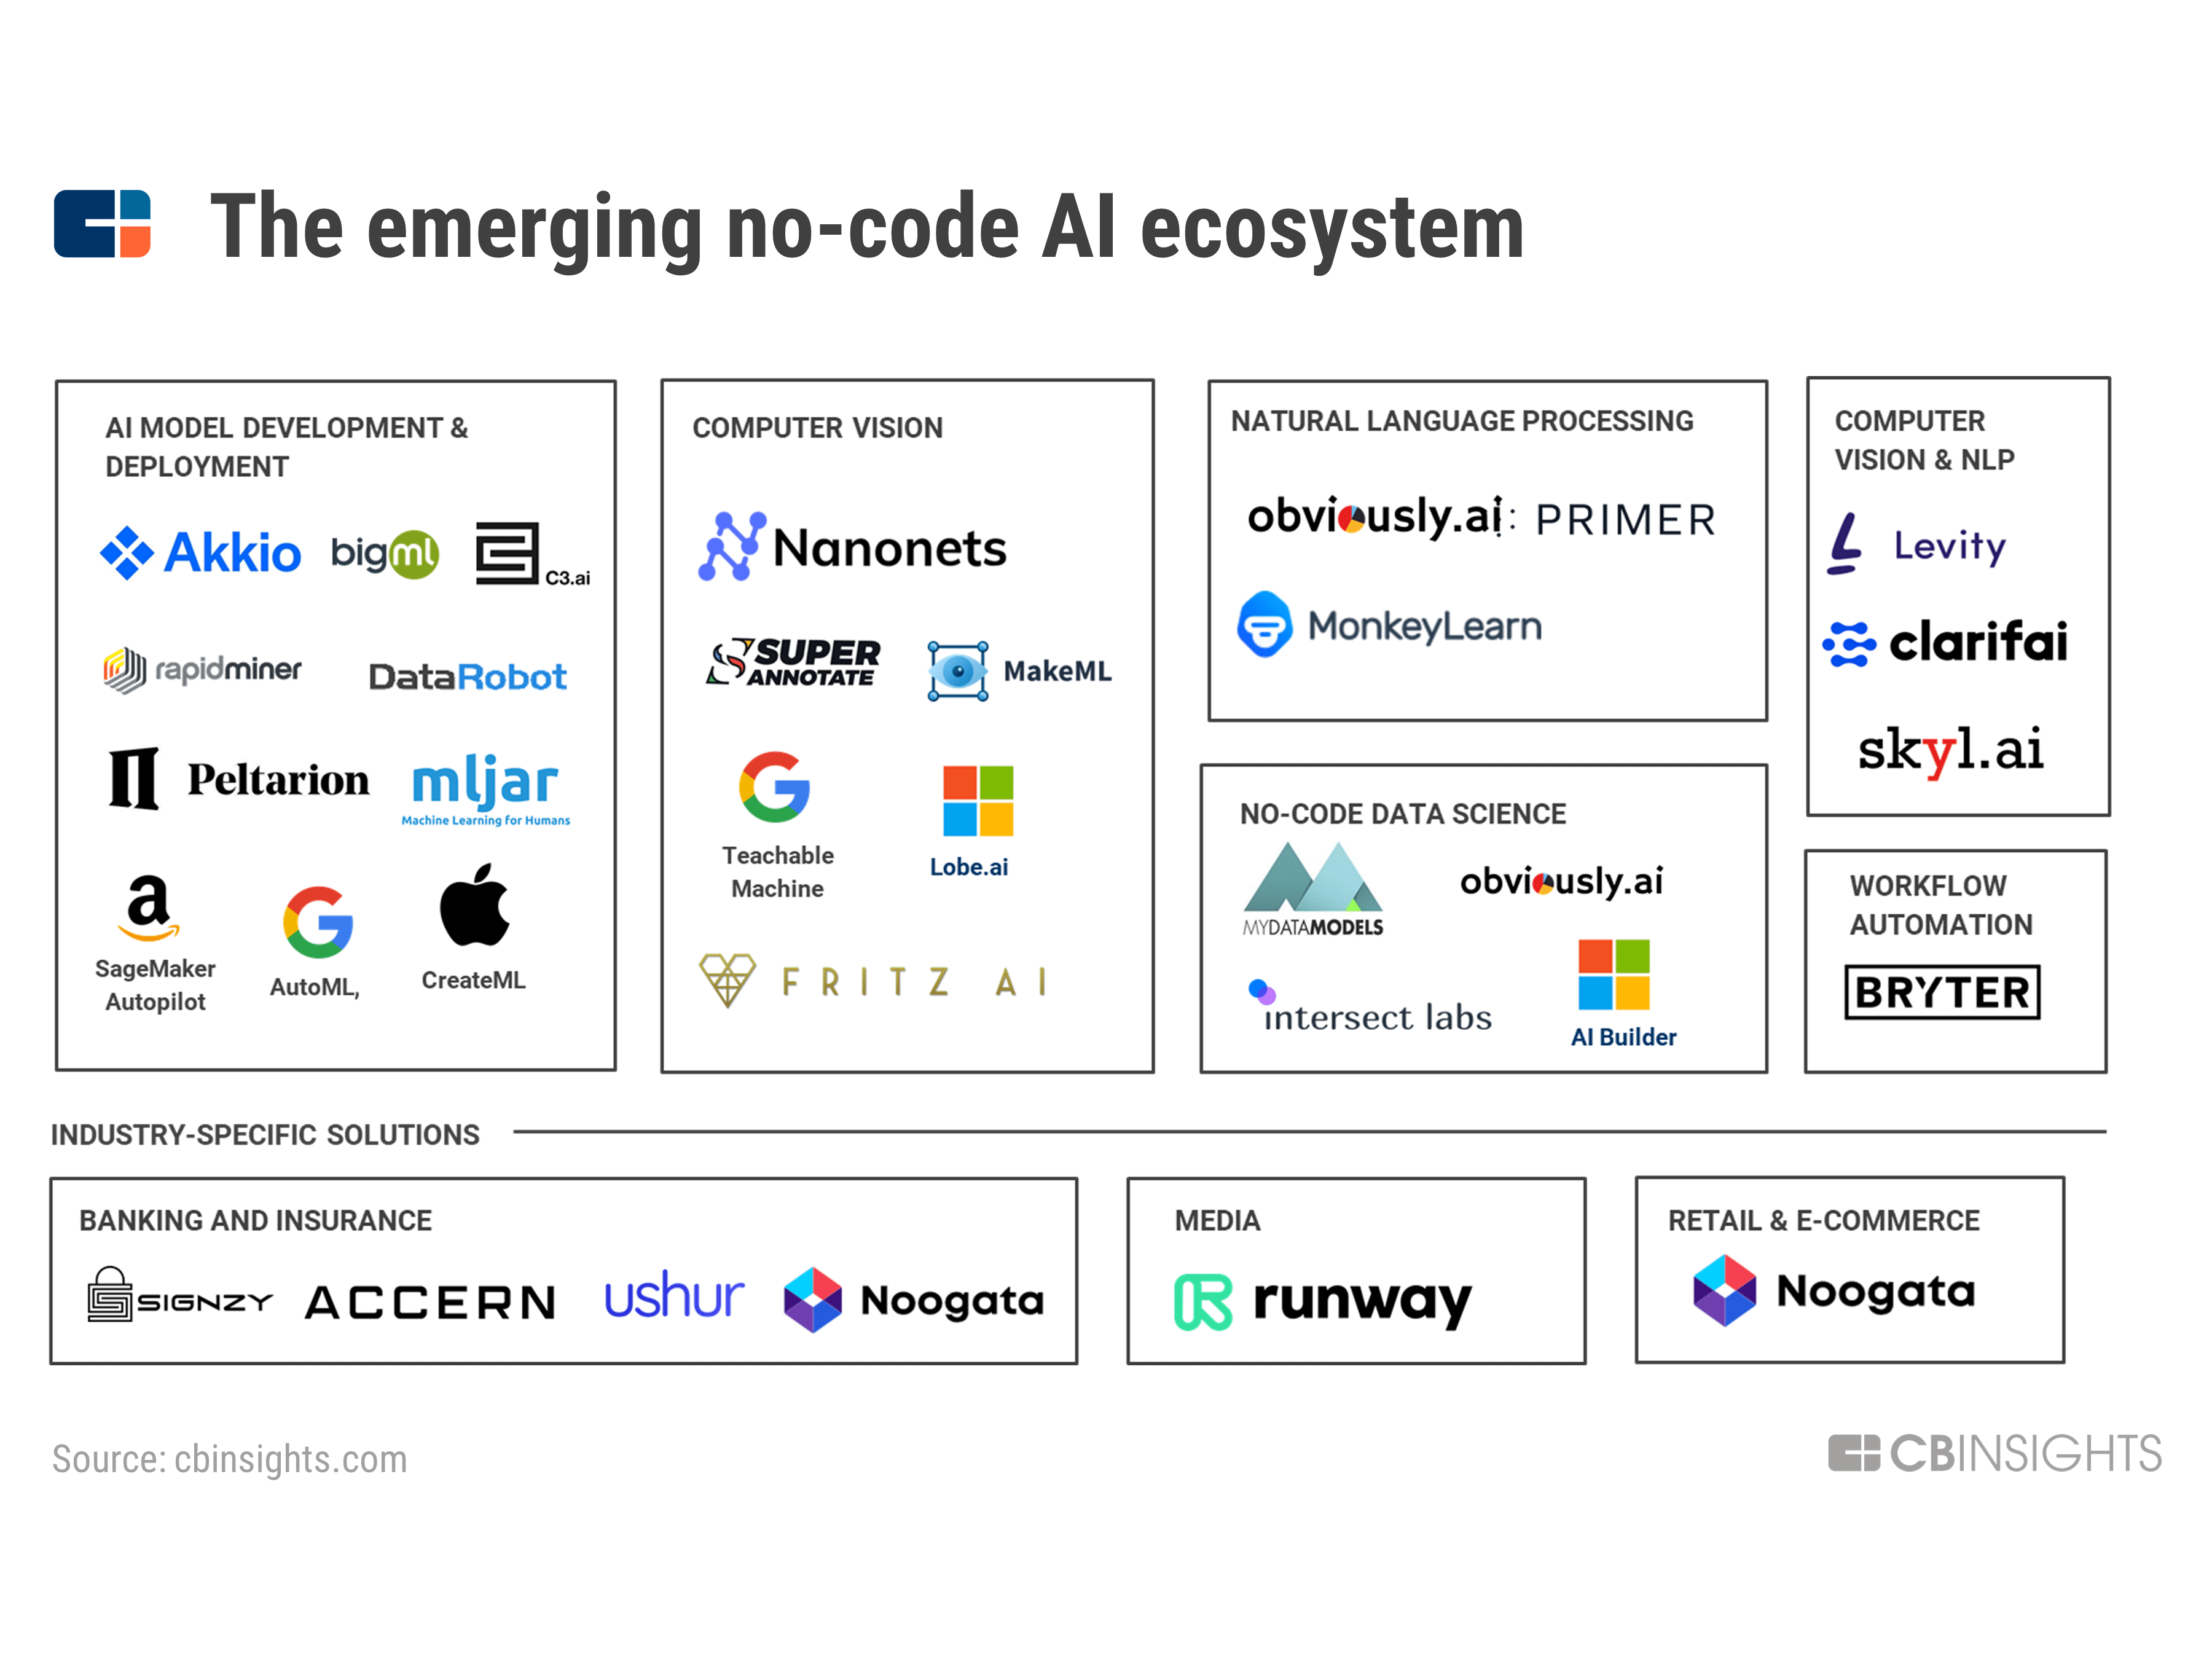 ML for Business professionals using No-Code AI tools